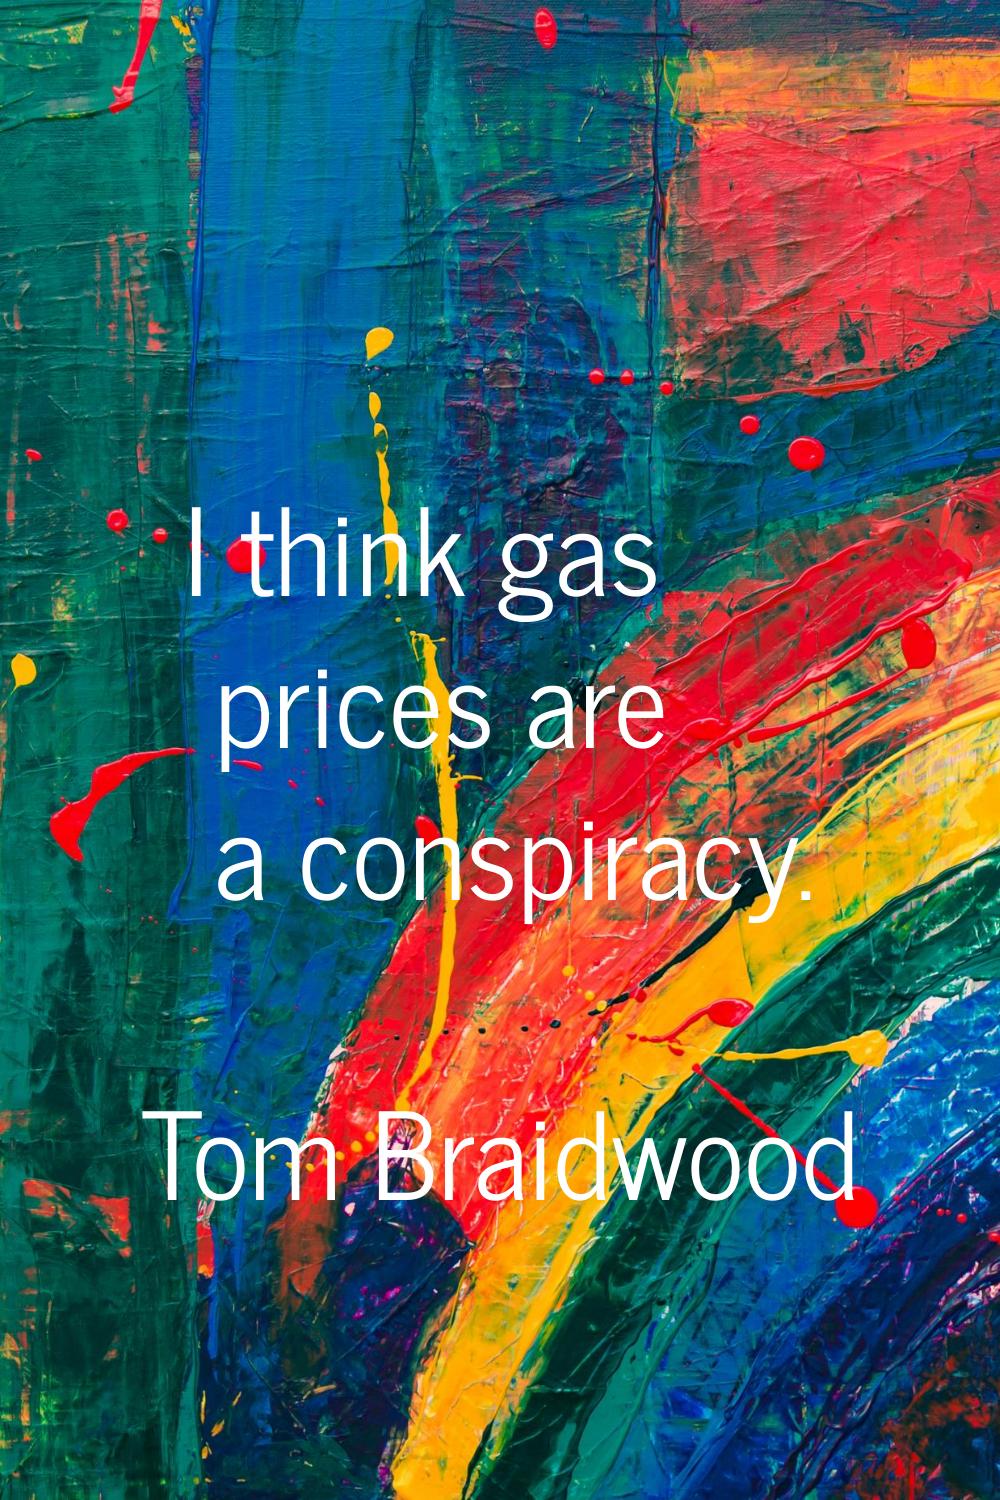 I think gas prices are a conspiracy.